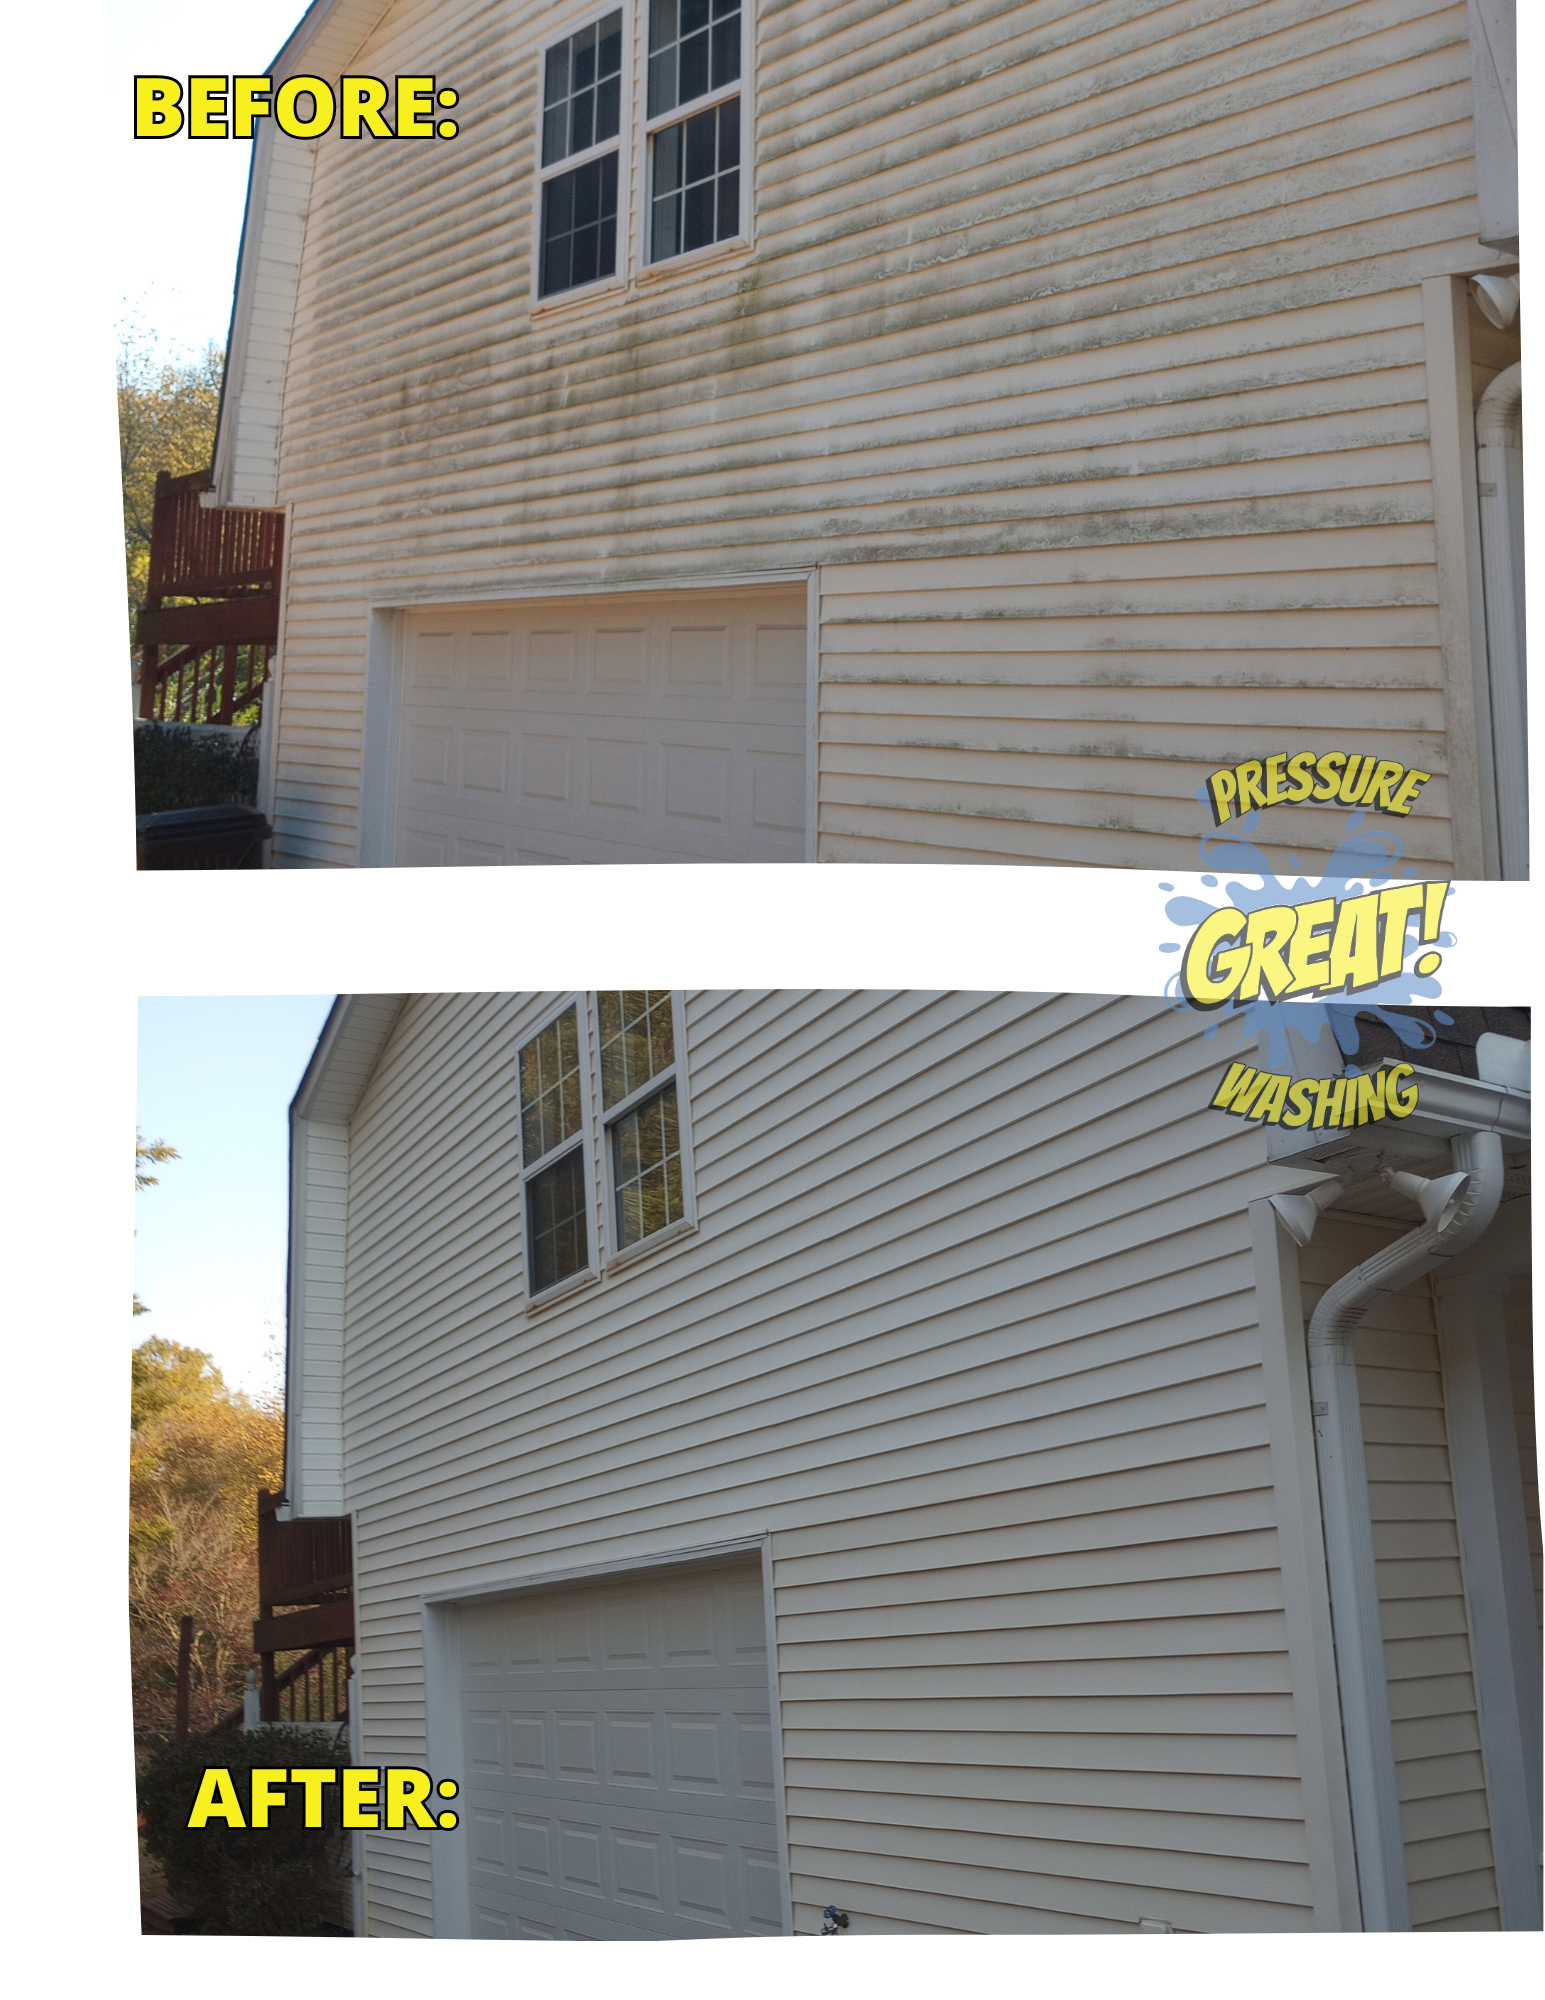 House Washing in Greenville South Carolina - Our GREAT! Value Special!